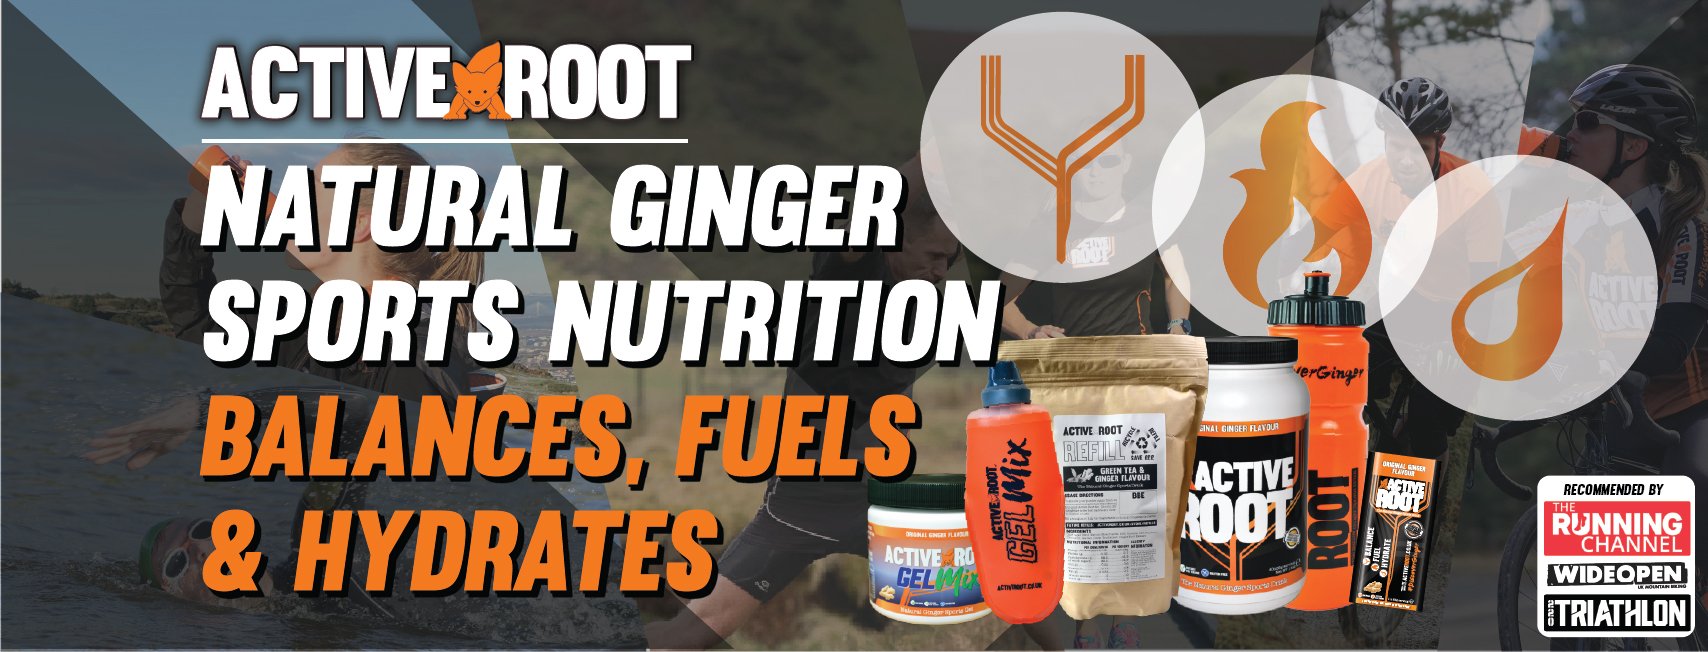 Fuel your summer with natural, delicious nutrition